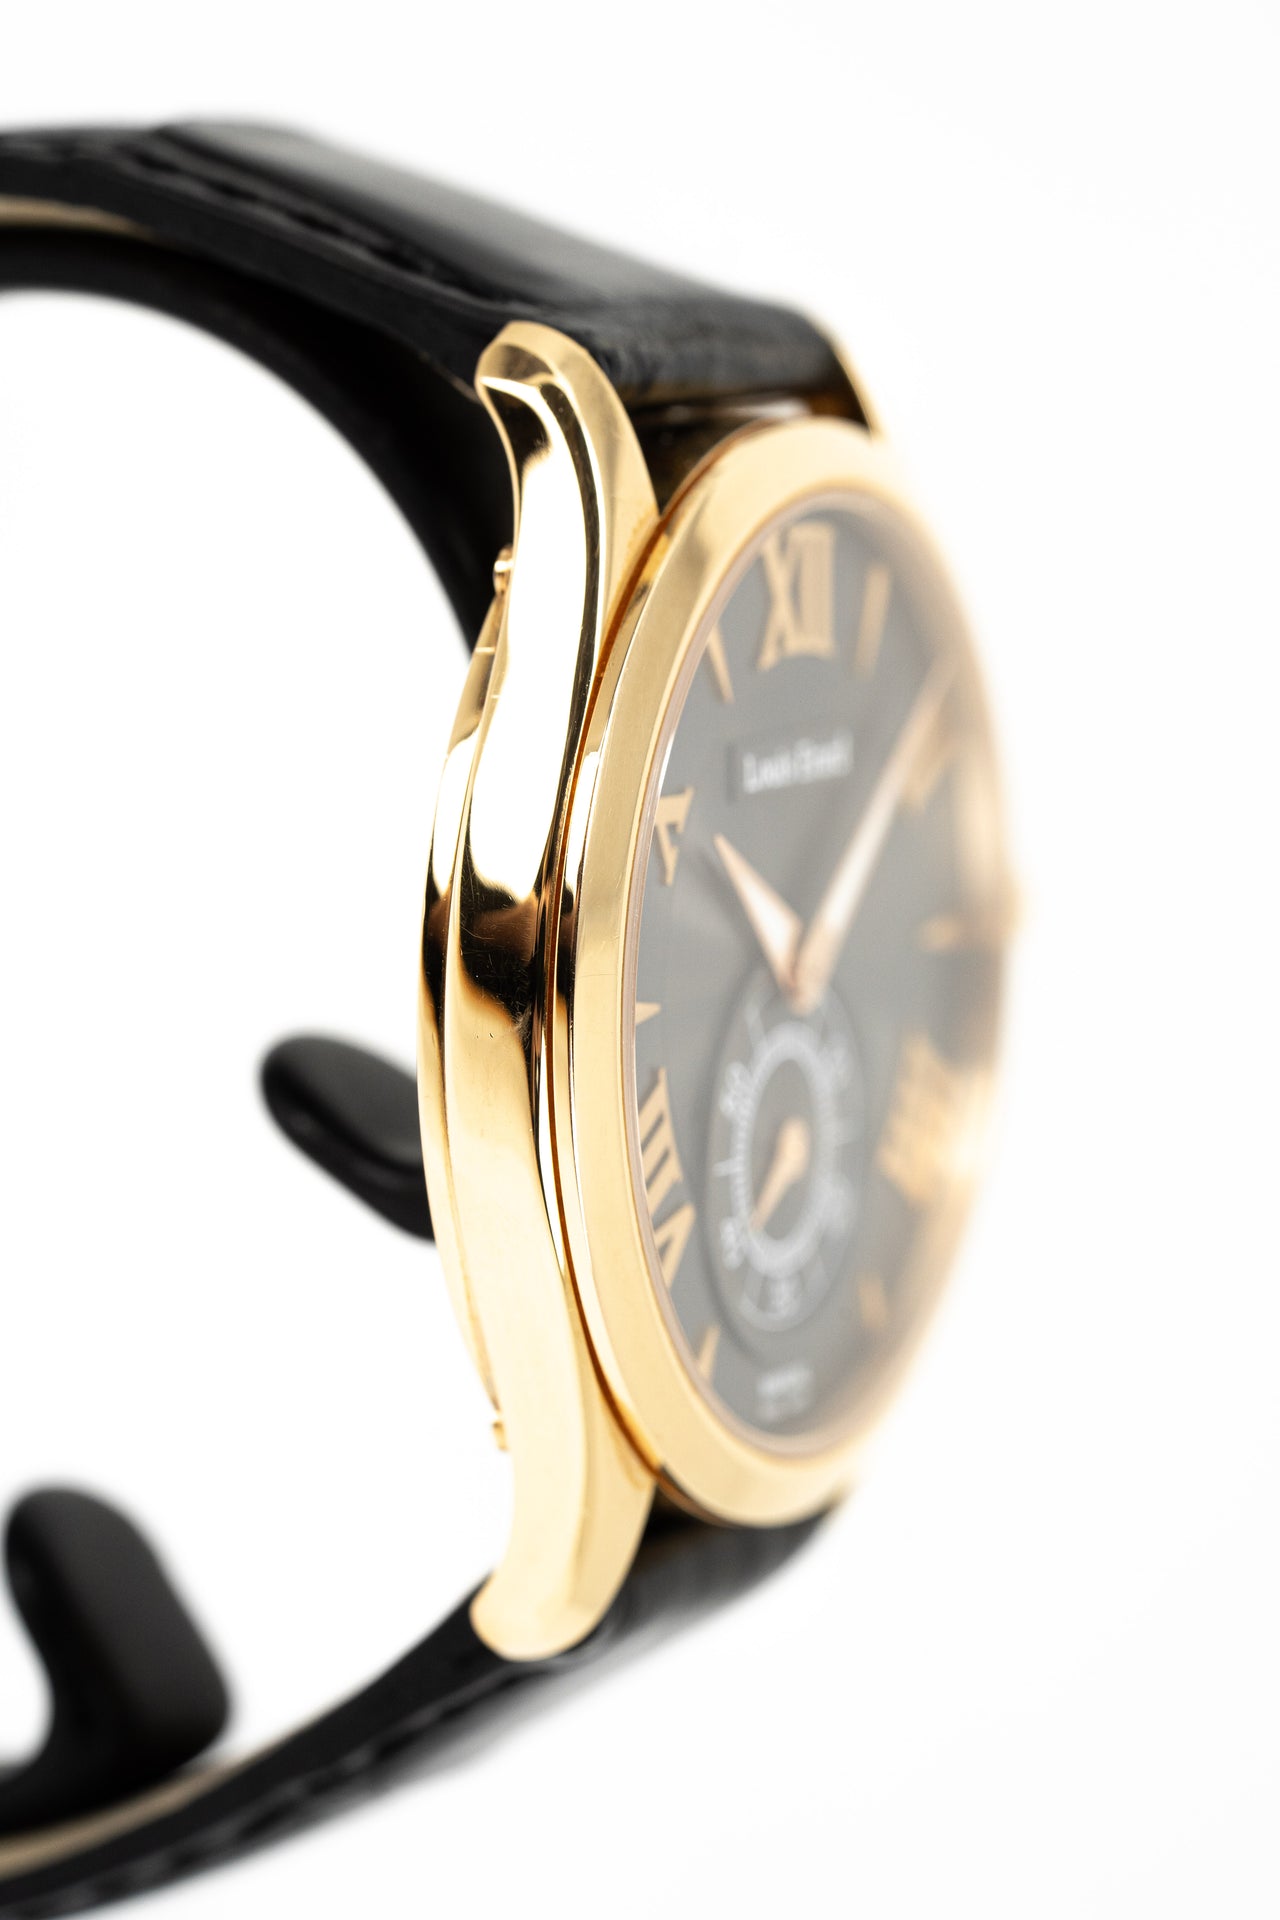 Louis Erard Emotion Mens Automatic Watch 92600os25.bas96 In Blue / Gold /  Gold Tone / Rose / Rose Gold / Rose Gold Tone